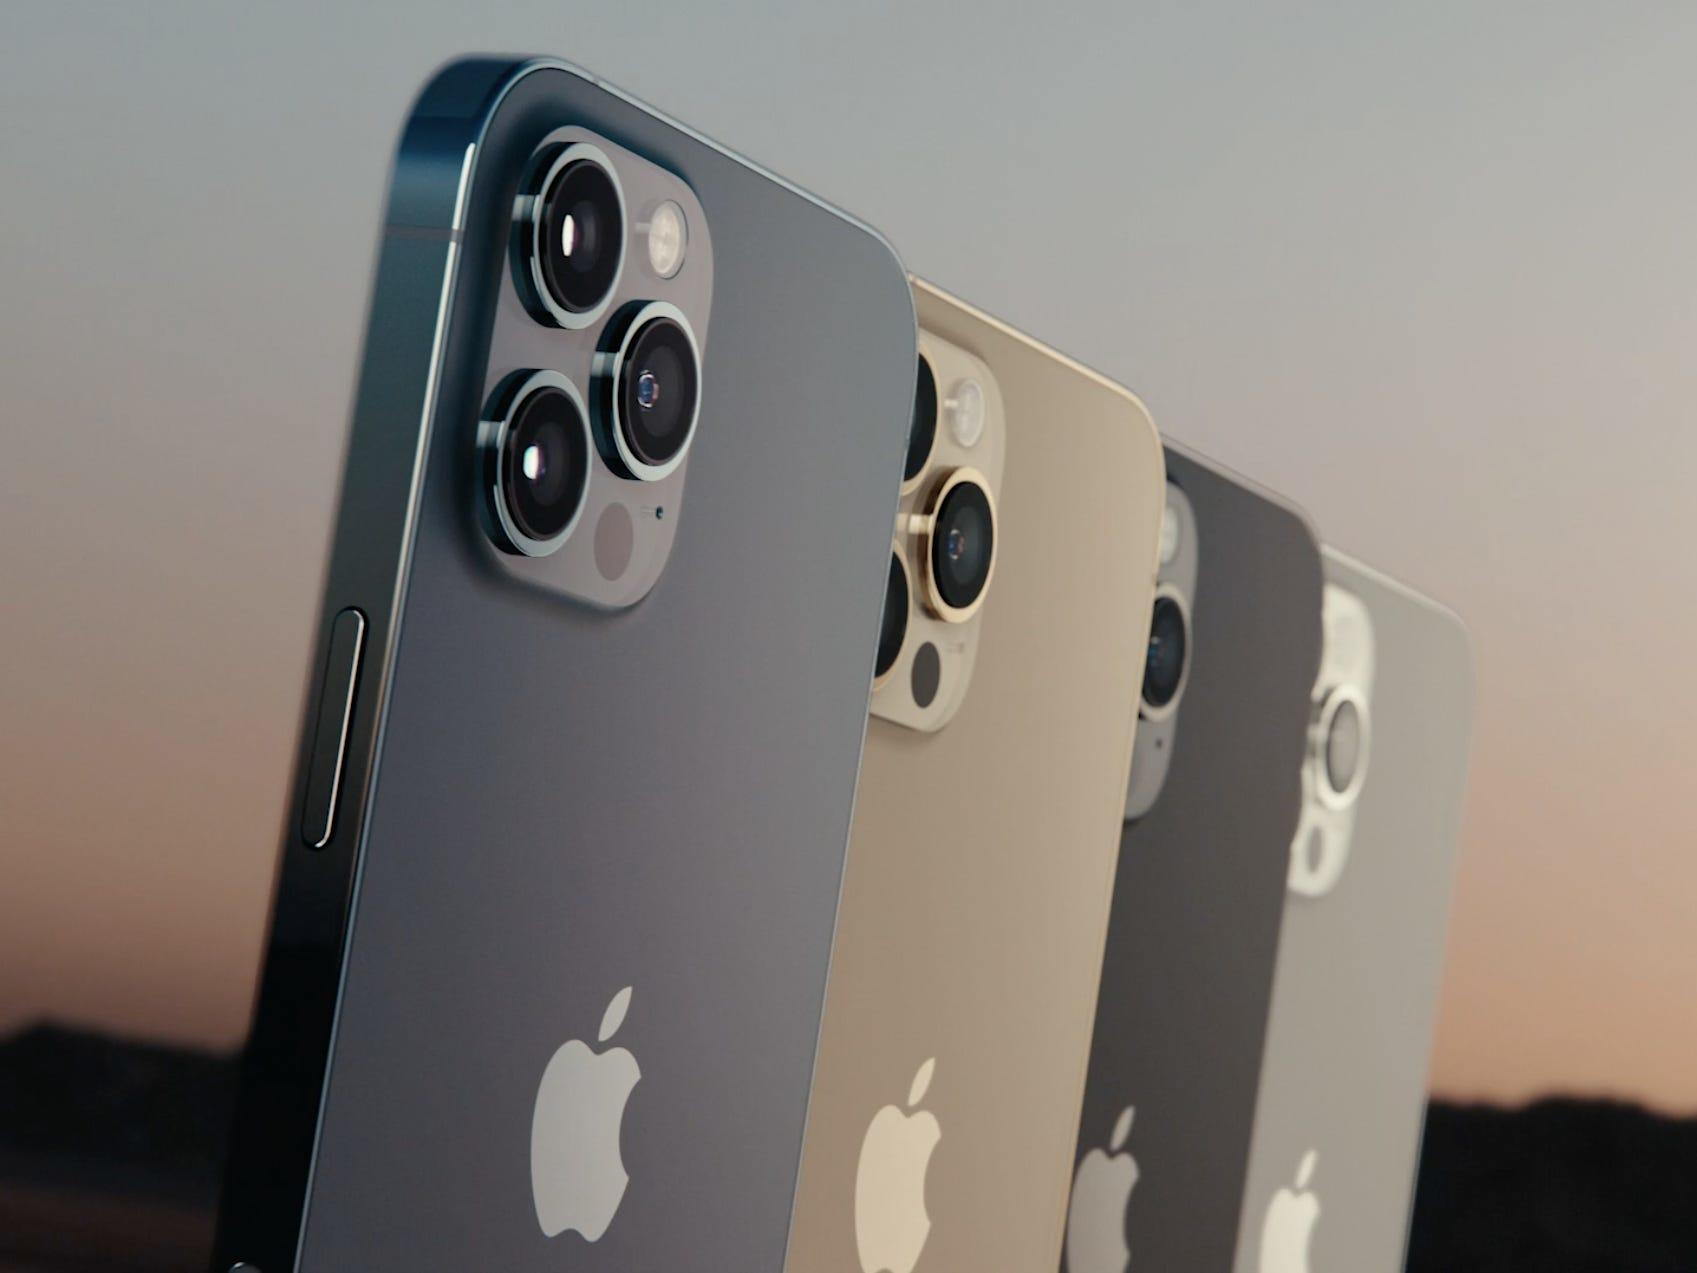 The iPhone 12 Pro is available in 4 colors — here's how to decide